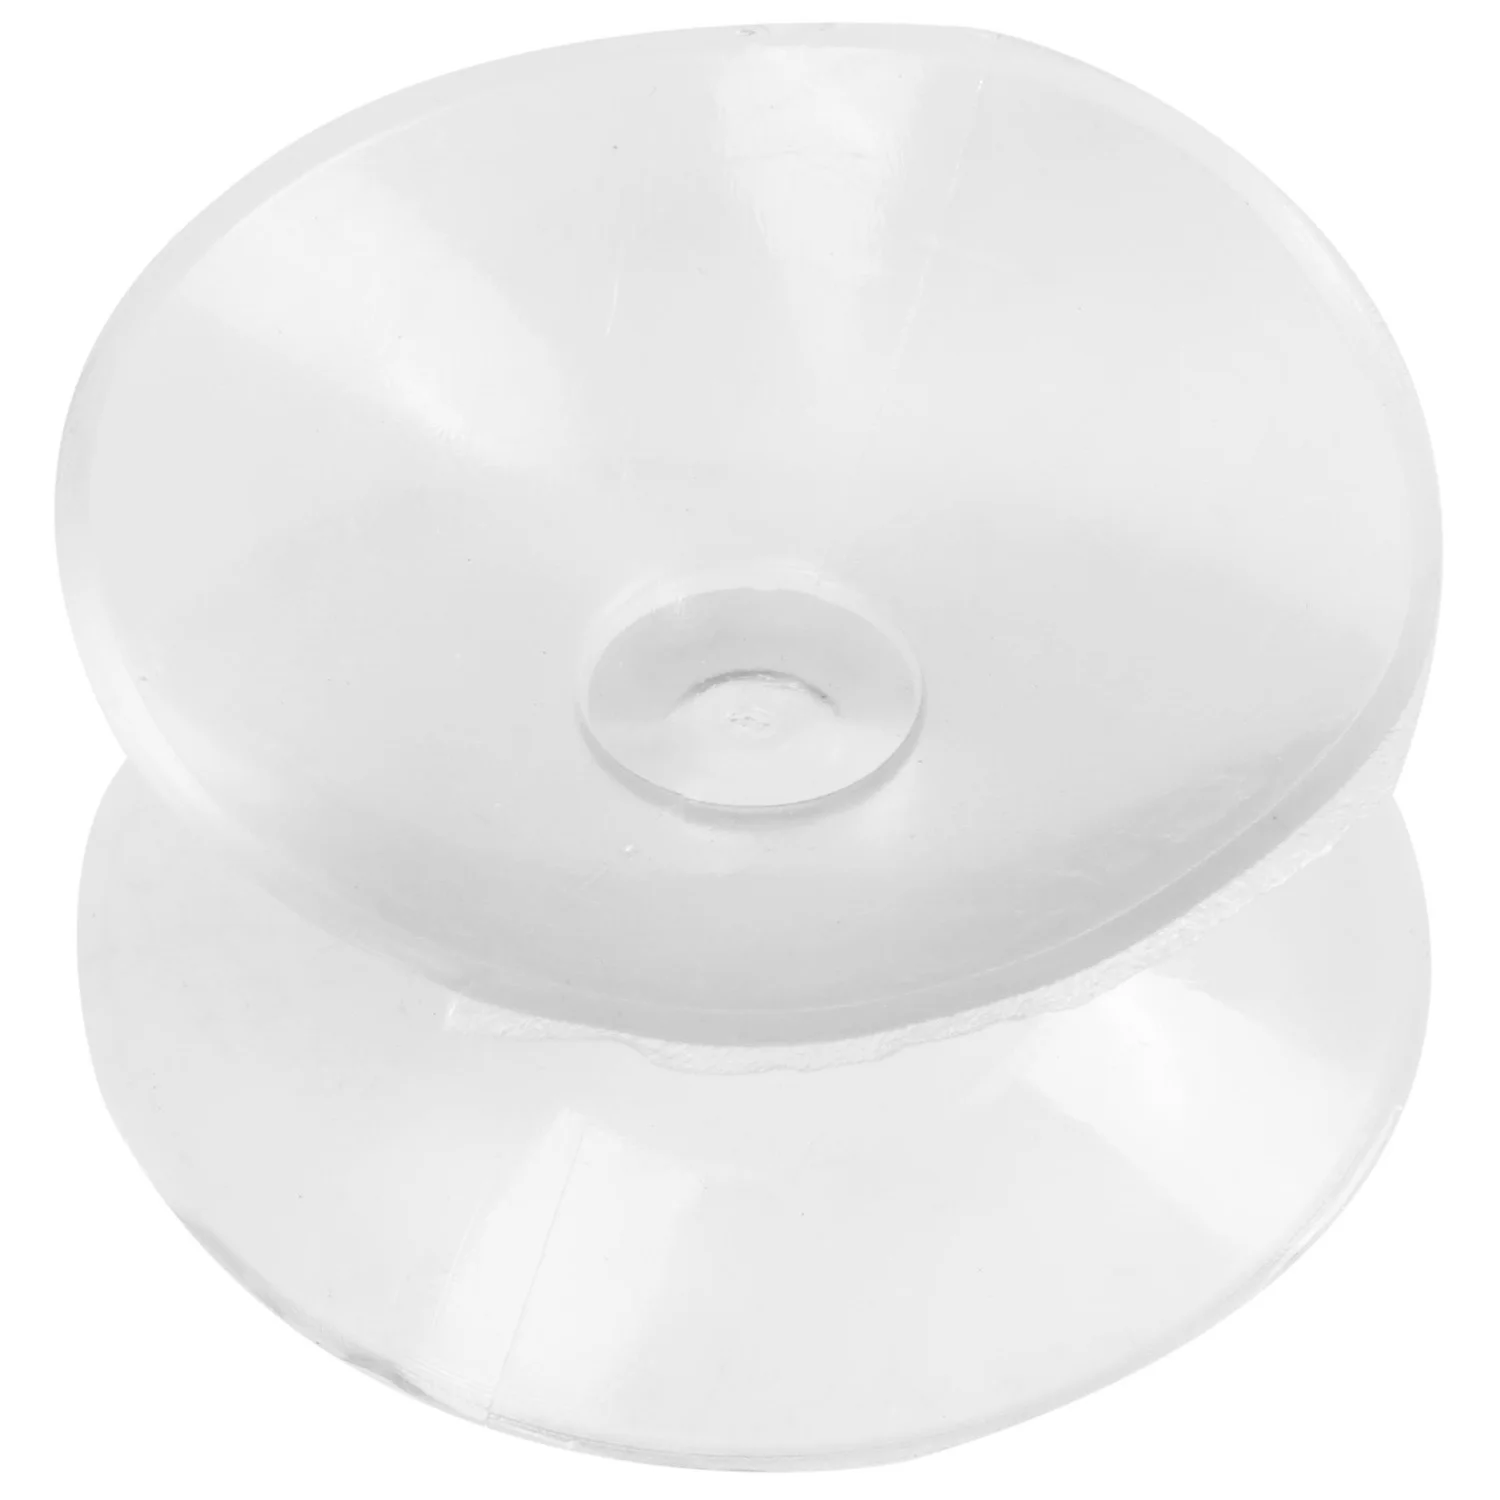 

10 Pcs Double Sided Suction Cup - Sucker Pads for Glass Plastic - 30Mm Width